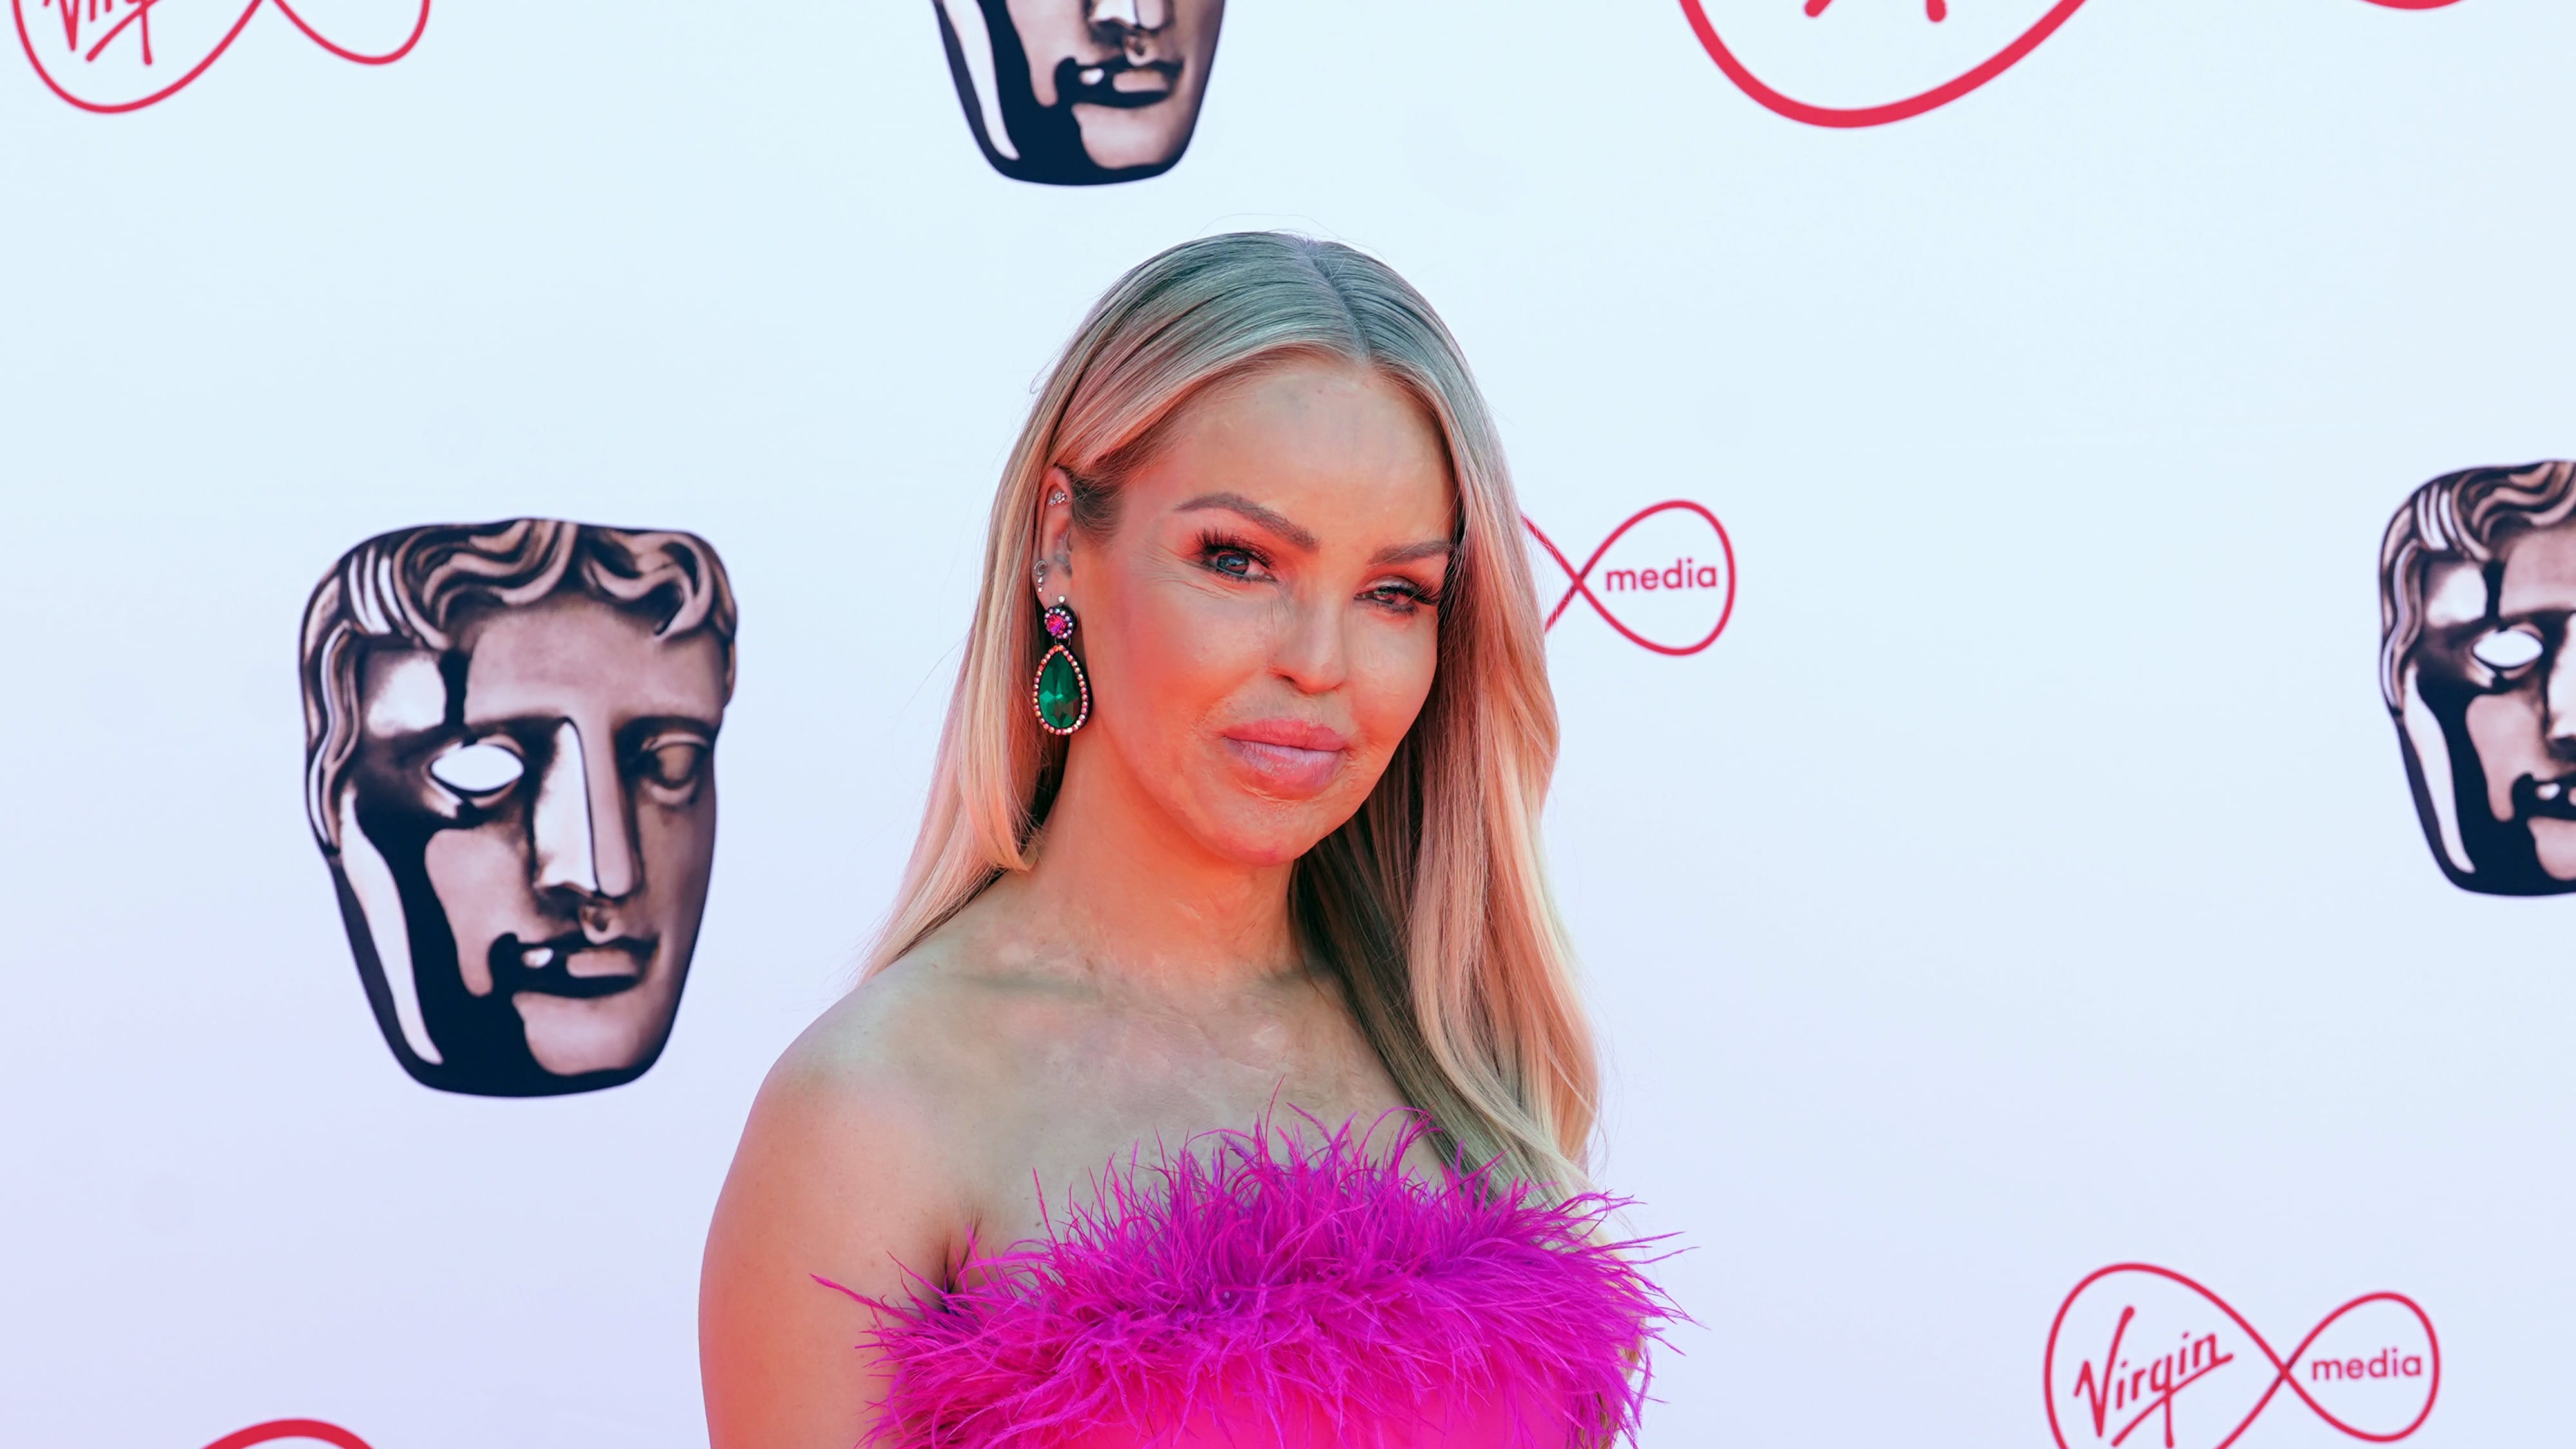 Katie Piper was left blind in one eye during the attack in March 2008